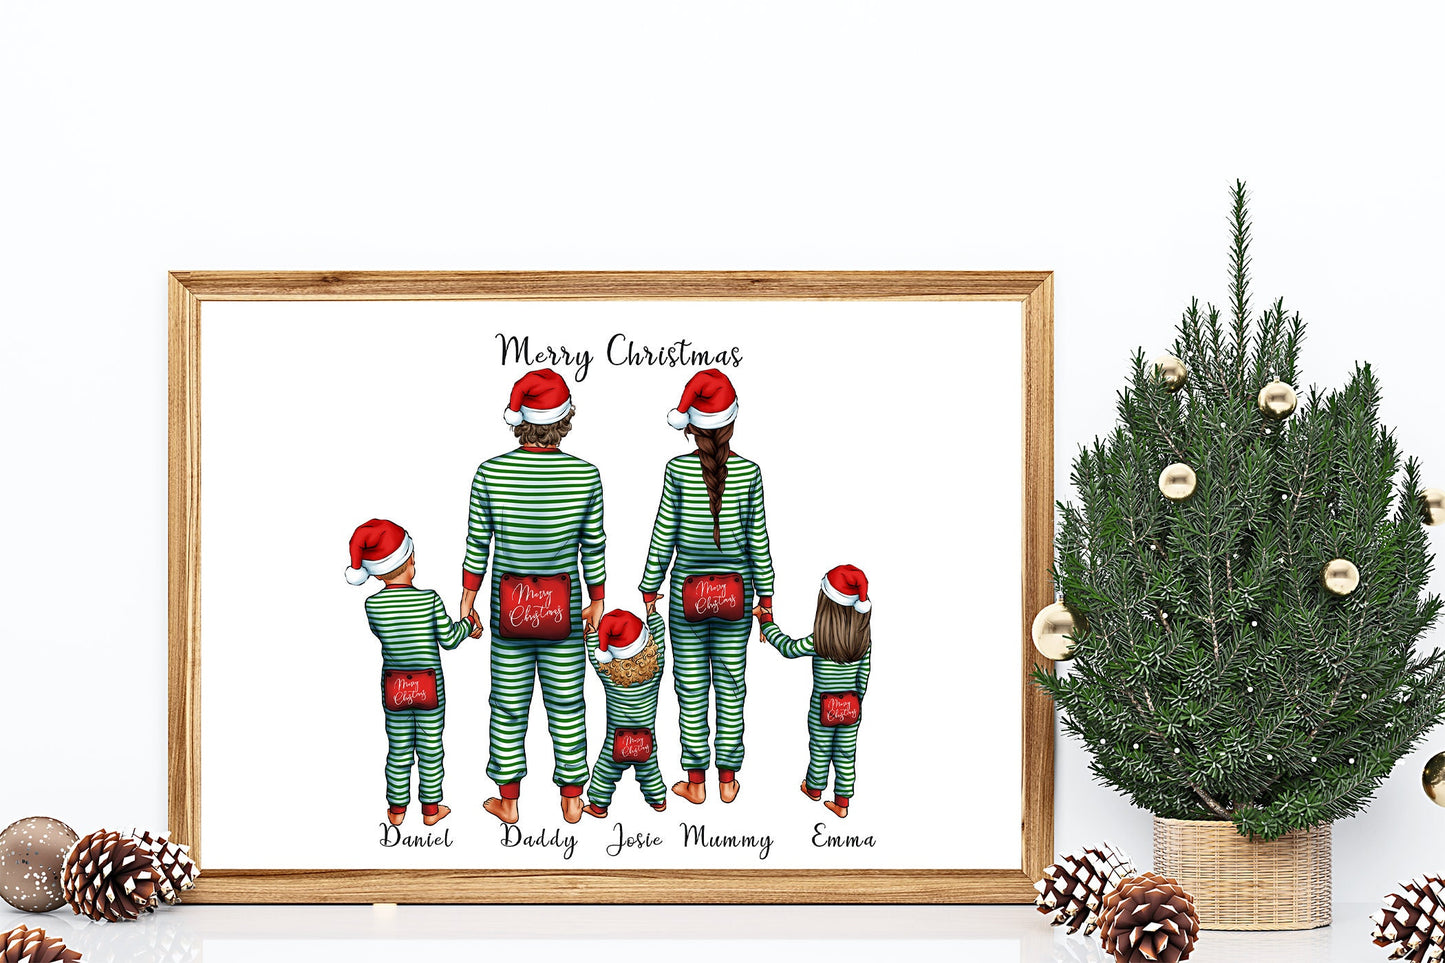 Customisable Family Christmas Pyjama Photo Print – Cherish the festive moments with matching PJ's and treasured pet| A4 | A5 | Greeting card